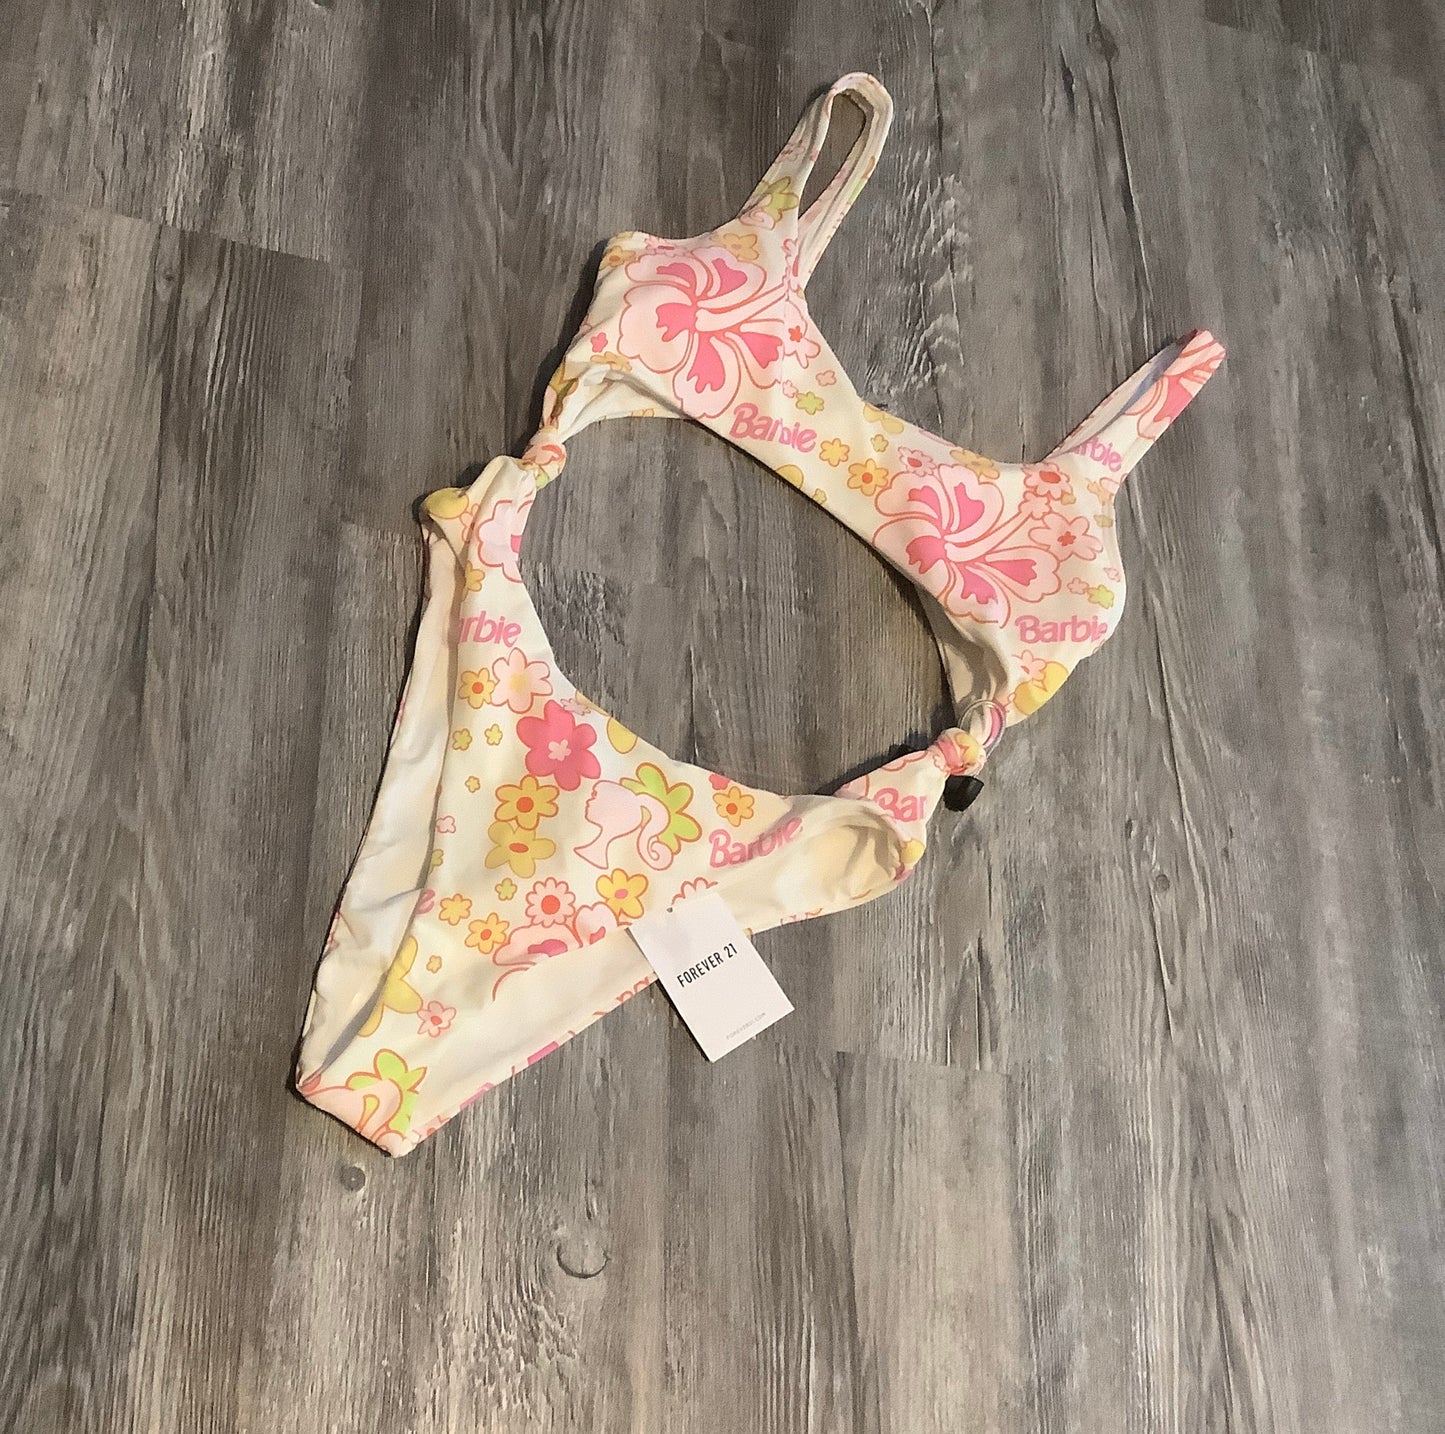 Floral Print Swimsuit Forever 21, Size S